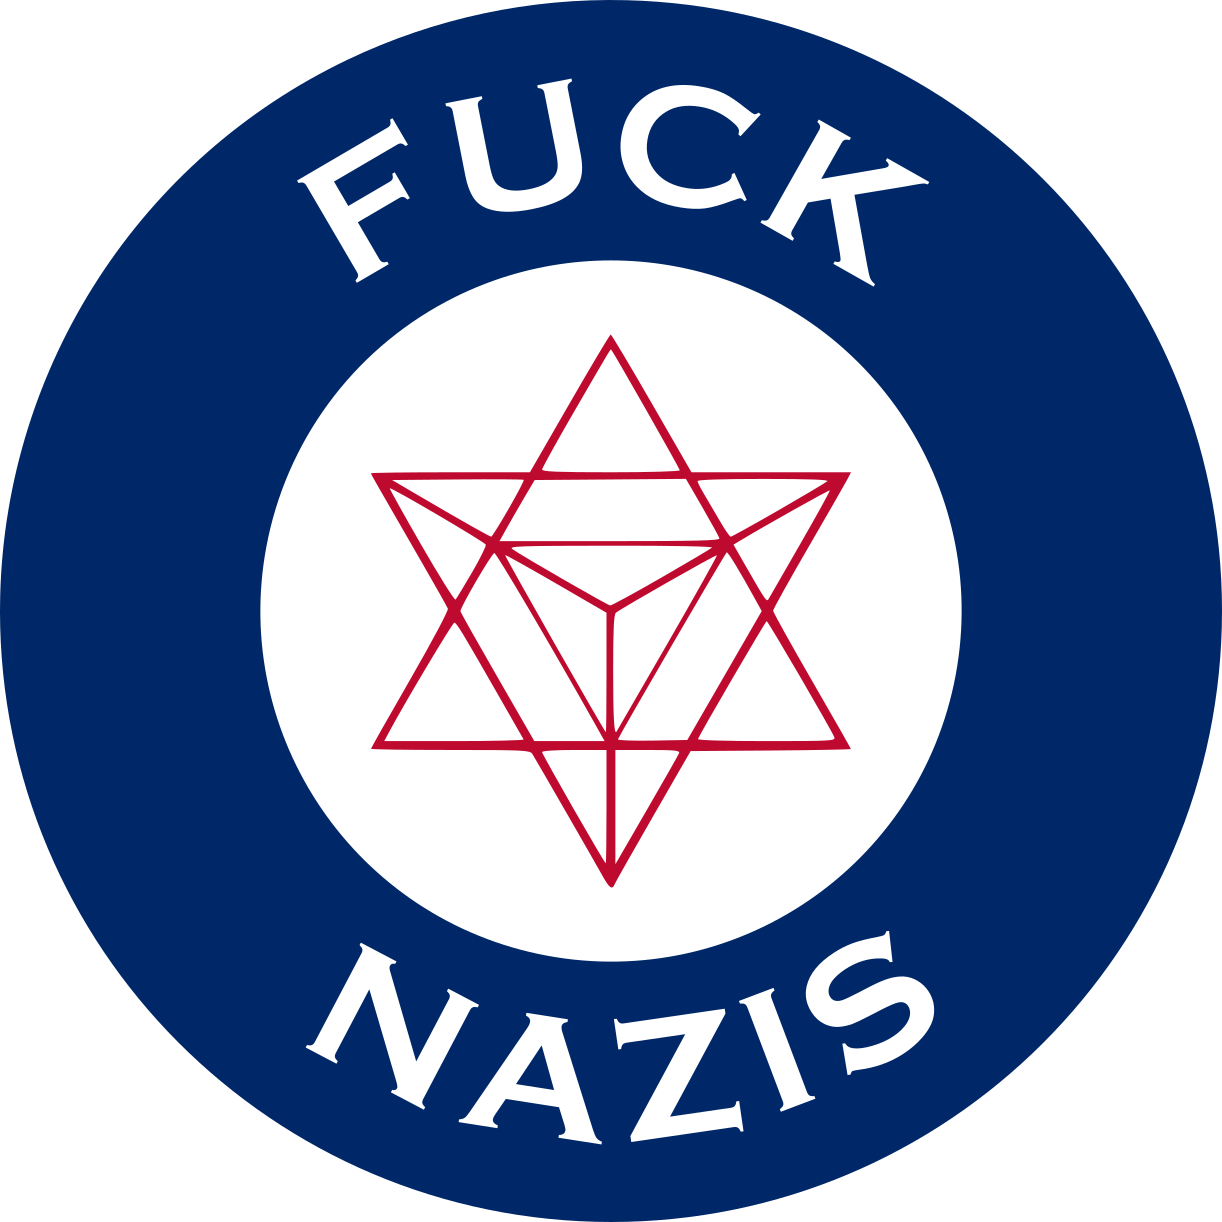 Fuck Nazis Virtual Lapel Pin Sale Currently Under Way.